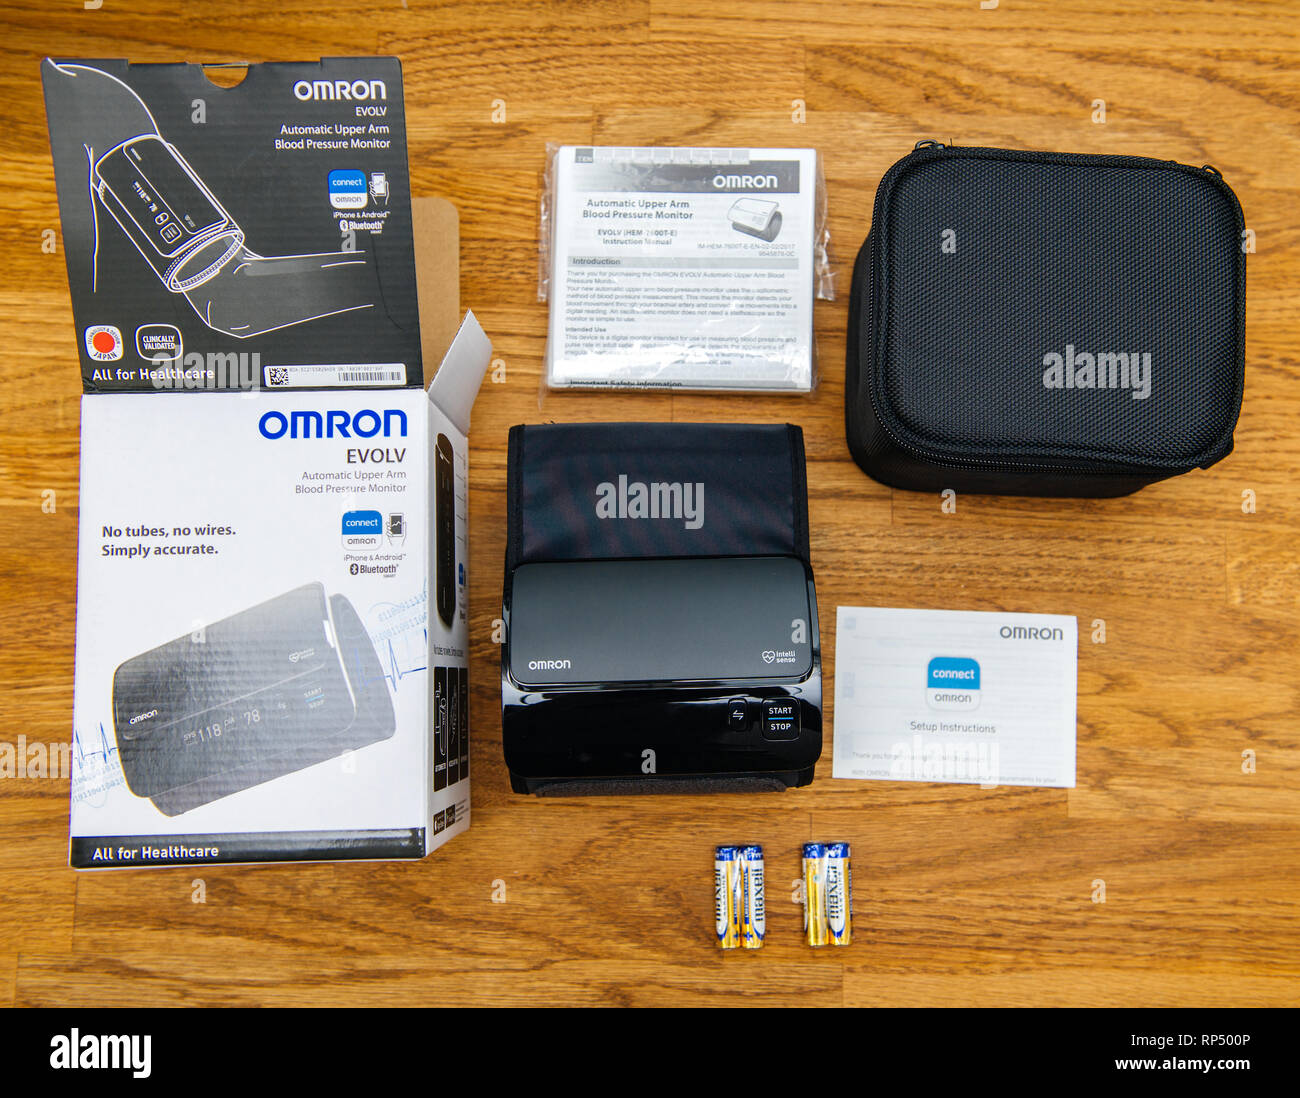 https://c8.alamy.com/comp/RP500P/paris-france-oct-2-2018-unboxing-view-from-above-a-omron-evolv-automatic-upper-arm-blood-pressure-monitor-RP500P.jpg